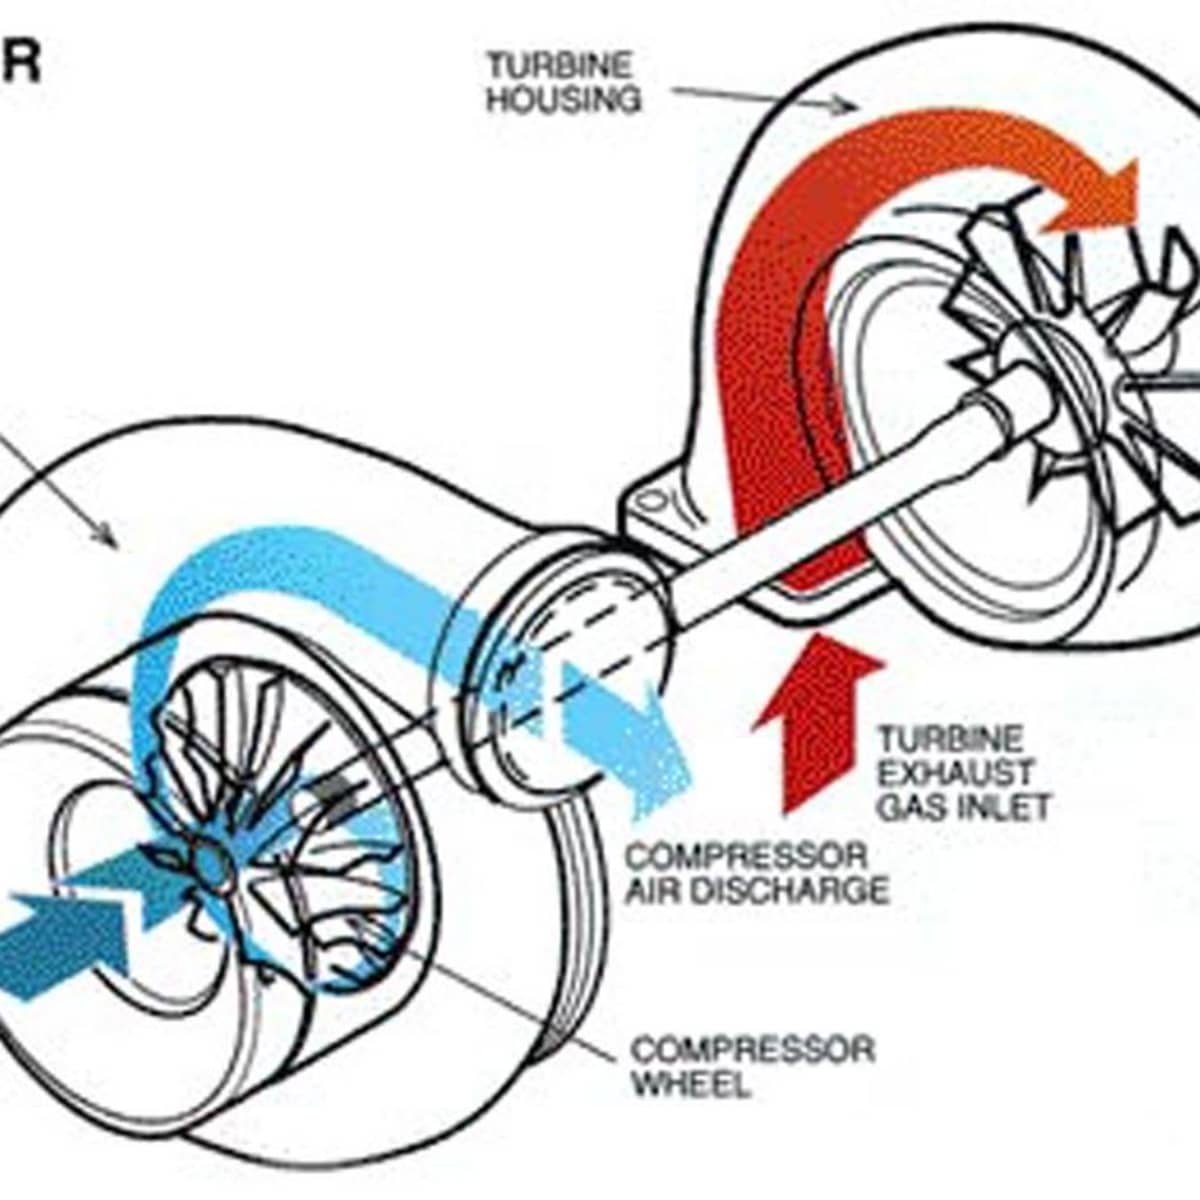 6 Signs Your Car has a Failing Turbocharger - BreakerLink Blog